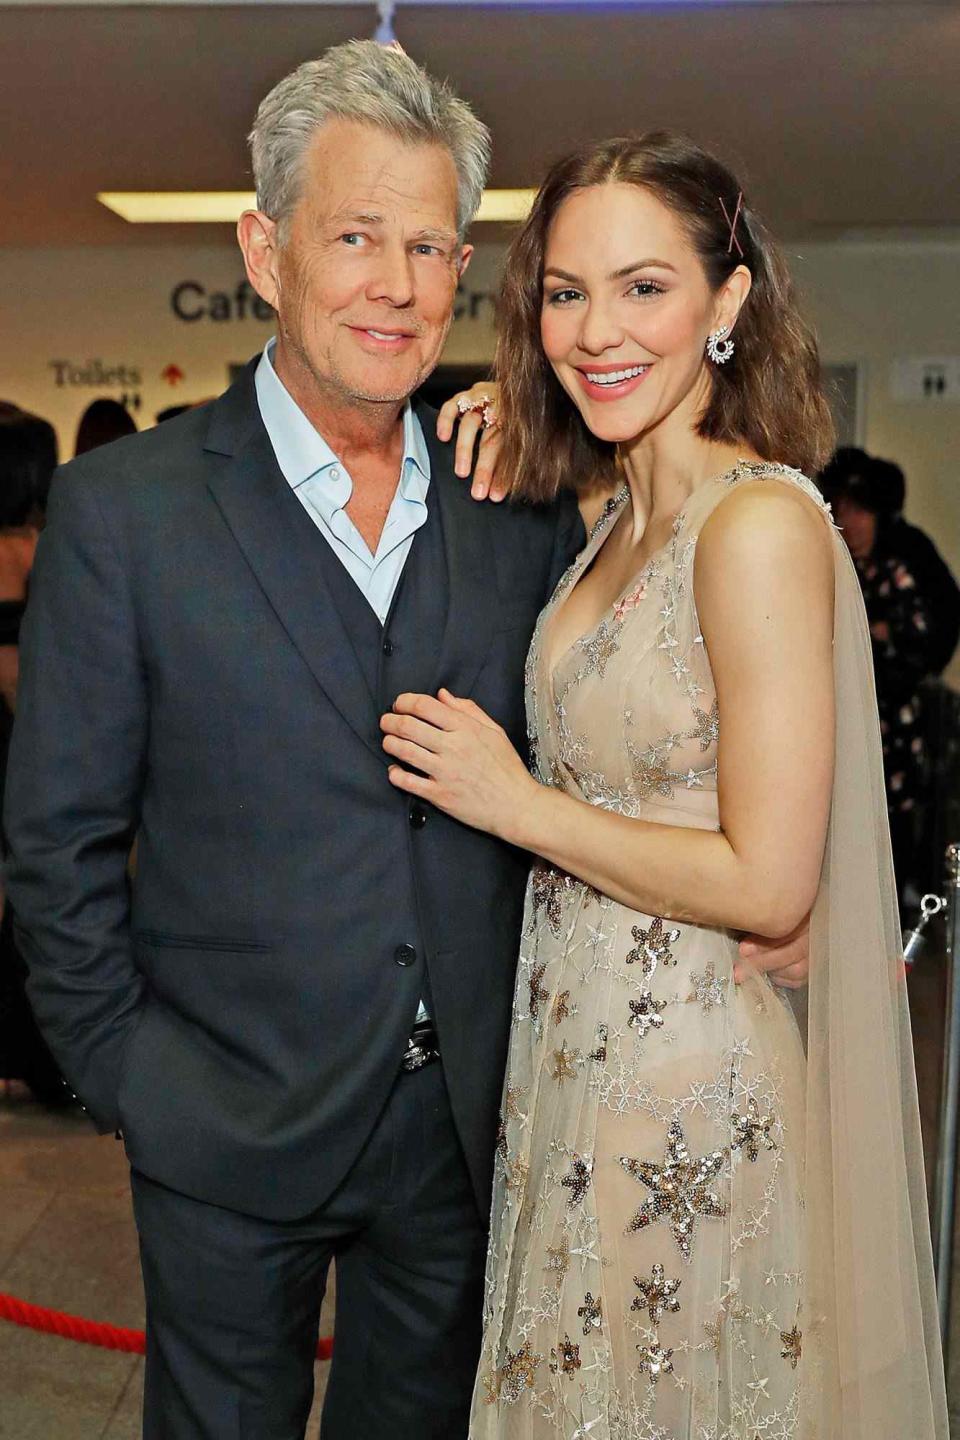 <p>He's here! The <em>Smash</em> actress, 36, has <a href="https://people.com/parents/katharine-mcphee-welcomes-first-child-husband-david-foster-son/" rel="nofollow noopener" target="_blank" data-ylk="slk:welcomed her first child;elm:context_link;itc:0;sec:content-canvas" class="link ">welcomed her first child</a>, a son, with husband <a href="https://people.com/tag/david-foster/" rel="nofollow noopener" target="_blank" data-ylk="slk:David Foster;elm:context_link;itc:0;sec:content-canvas" class="link ">David Foster</a>, her rep confirmed to PEOPLE exclusively on Feb. 24. </p> <p>"Katharine McPhee and David Foster have welcomed a healthy baby boy," the rep told PEOPLE. "Mom, Dad and son are all doing wonderfully." The couple have not yet publicly revealed their new addition's name.</p> <p>The pair <a href="https://people.com/music/katharine-mcphee-david-foster-married/" rel="nofollow noopener" target="_blank" data-ylk="slk:tied the knot;elm:context_link;itc:0;sec:content-canvas" class="link ">tied the knot</a> in June 2019 after <a href="https://people.com/tv/david-foster-once-predicted-katharine-mcphee-great-future-american-idol/" rel="nofollow noopener" target="_blank" data-ylk="slk:first meeting in 2006;elm:context_link;itc:0;sec:content-canvas" class="link ">first meeting in 2006</a>, when Foster mentored McPhee while she was a contestant on season 5 of <em><a href="https://people.com/tag/american-idol/" rel="nofollow noopener" target="_blank" data-ylk="slk:American Idol;elm:context_link;itc:0;sec:content-canvas" class="link ">American Idol</a>. </em>Foster is already father to daughters <a href="http://people.com/tag/sara-foster" rel="nofollow noopener" target="_blank" data-ylk="slk:Sara;elm:context_link;itc:0;sec:content-canvas" class="link ">Sara</a>, 40, <a href="http://people.com/tag/erin-foster" rel="nofollow noopener" target="_blank" data-ylk="slk:Erin;elm:context_link;itc:0;sec:content-canvas" class="link ">Erin</a>, 38, and Jordan, 34, whom he shared with second wife <a href="https://people.com/tv/sara-foster-erin-foster-deep-resentment-dad-david-foster/" rel="nofollow noopener" target="_blank" data-ylk="slk:Rebecca Dyer;elm:context_link;itc:0;sec:content-canvas" class="link ">Rebecca Dyer</a>, and daughters Allison, 50, and <a href="https://people.com/music/david-foster-daughter-amy-breast-cancer-battle-strong-for-kids-exclusive/" rel="nofollow noopener" target="_blank" data-ylk="slk:Amy;elm:context_link;itc:0;sec:content-canvas" class="link ">Amy</a>, 47, from previous relationships.</p>